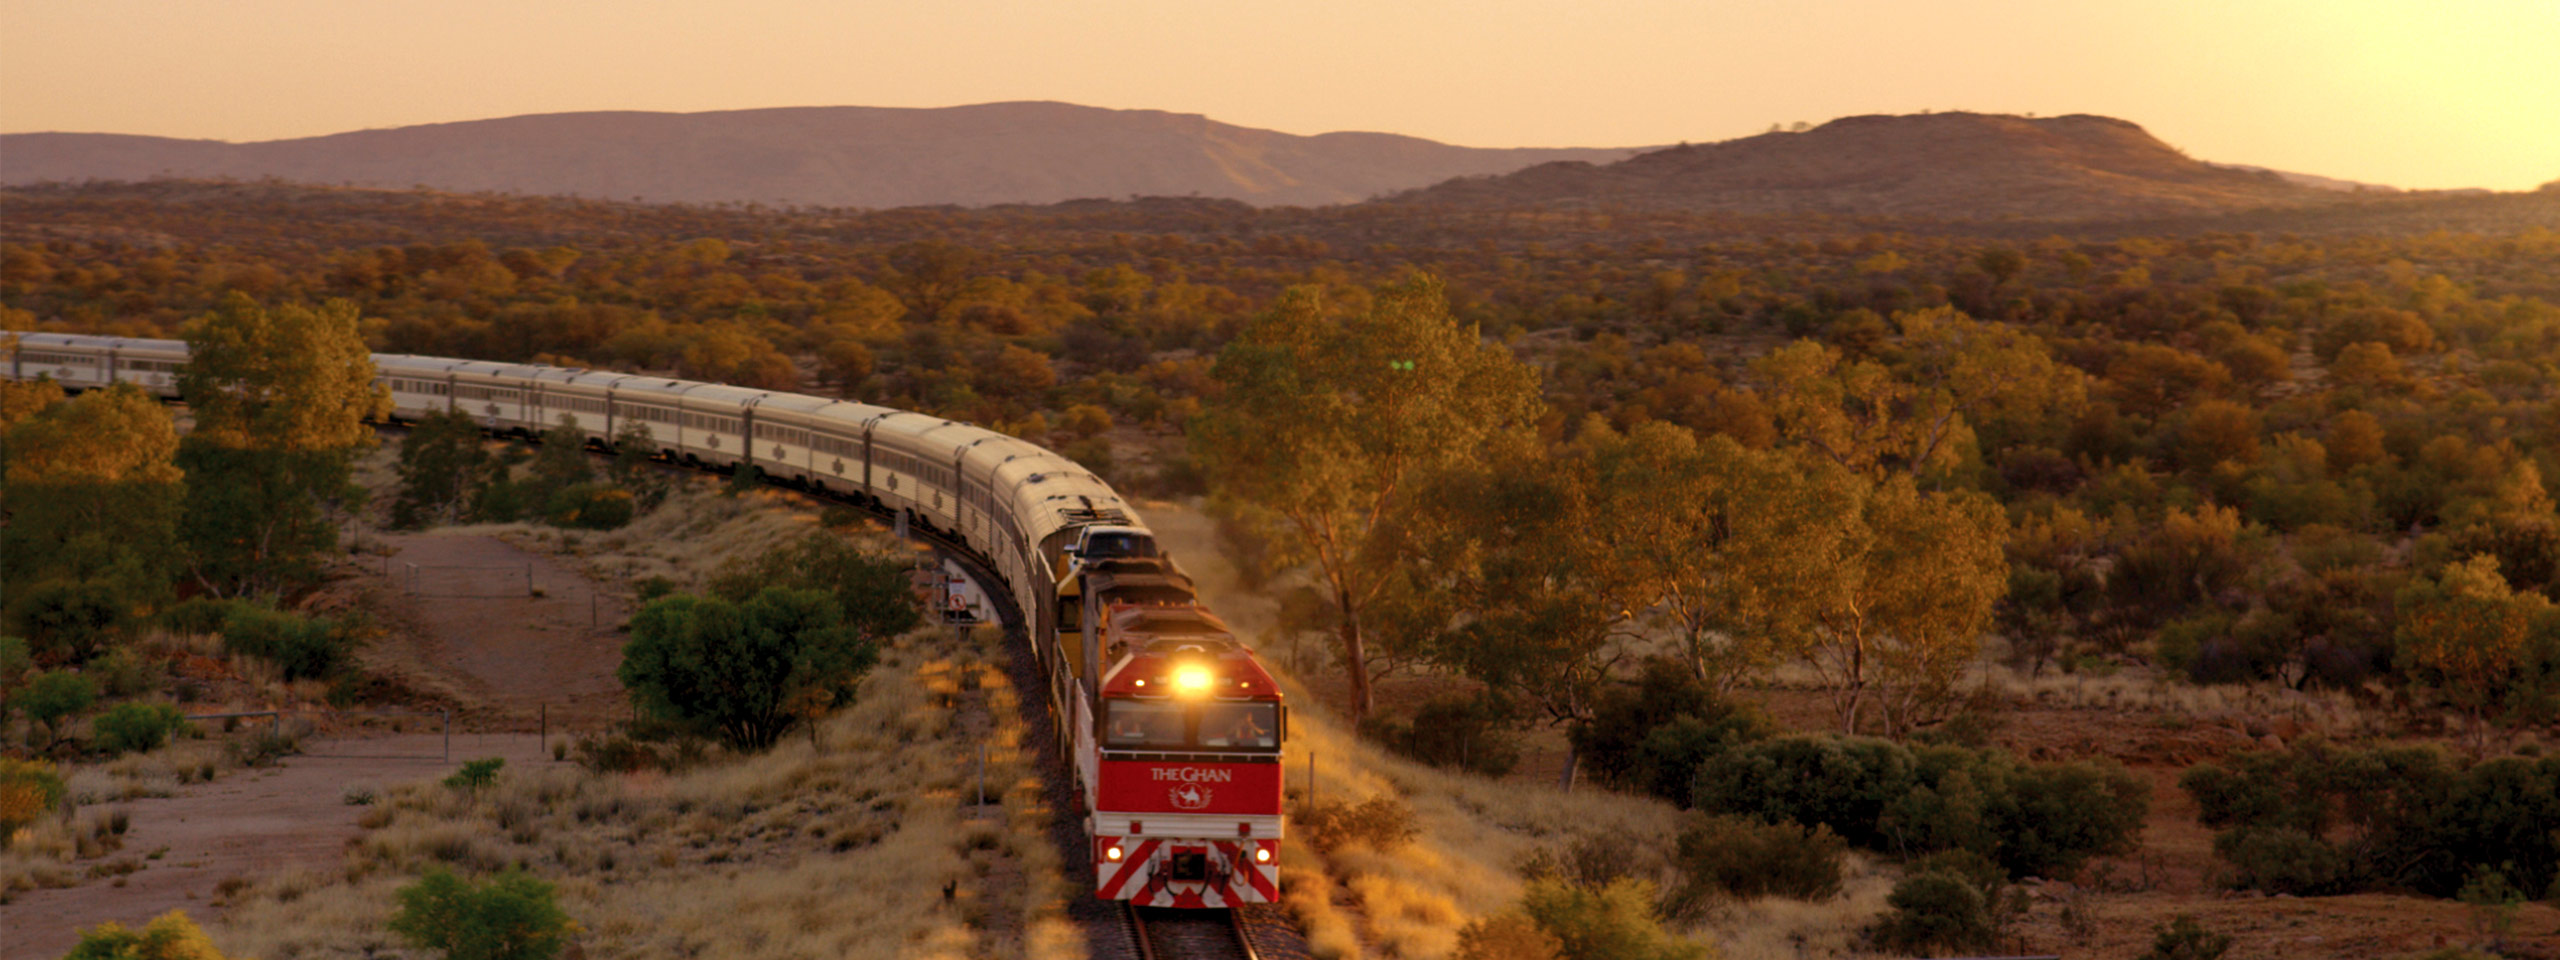 The Ghan, Northern Territory